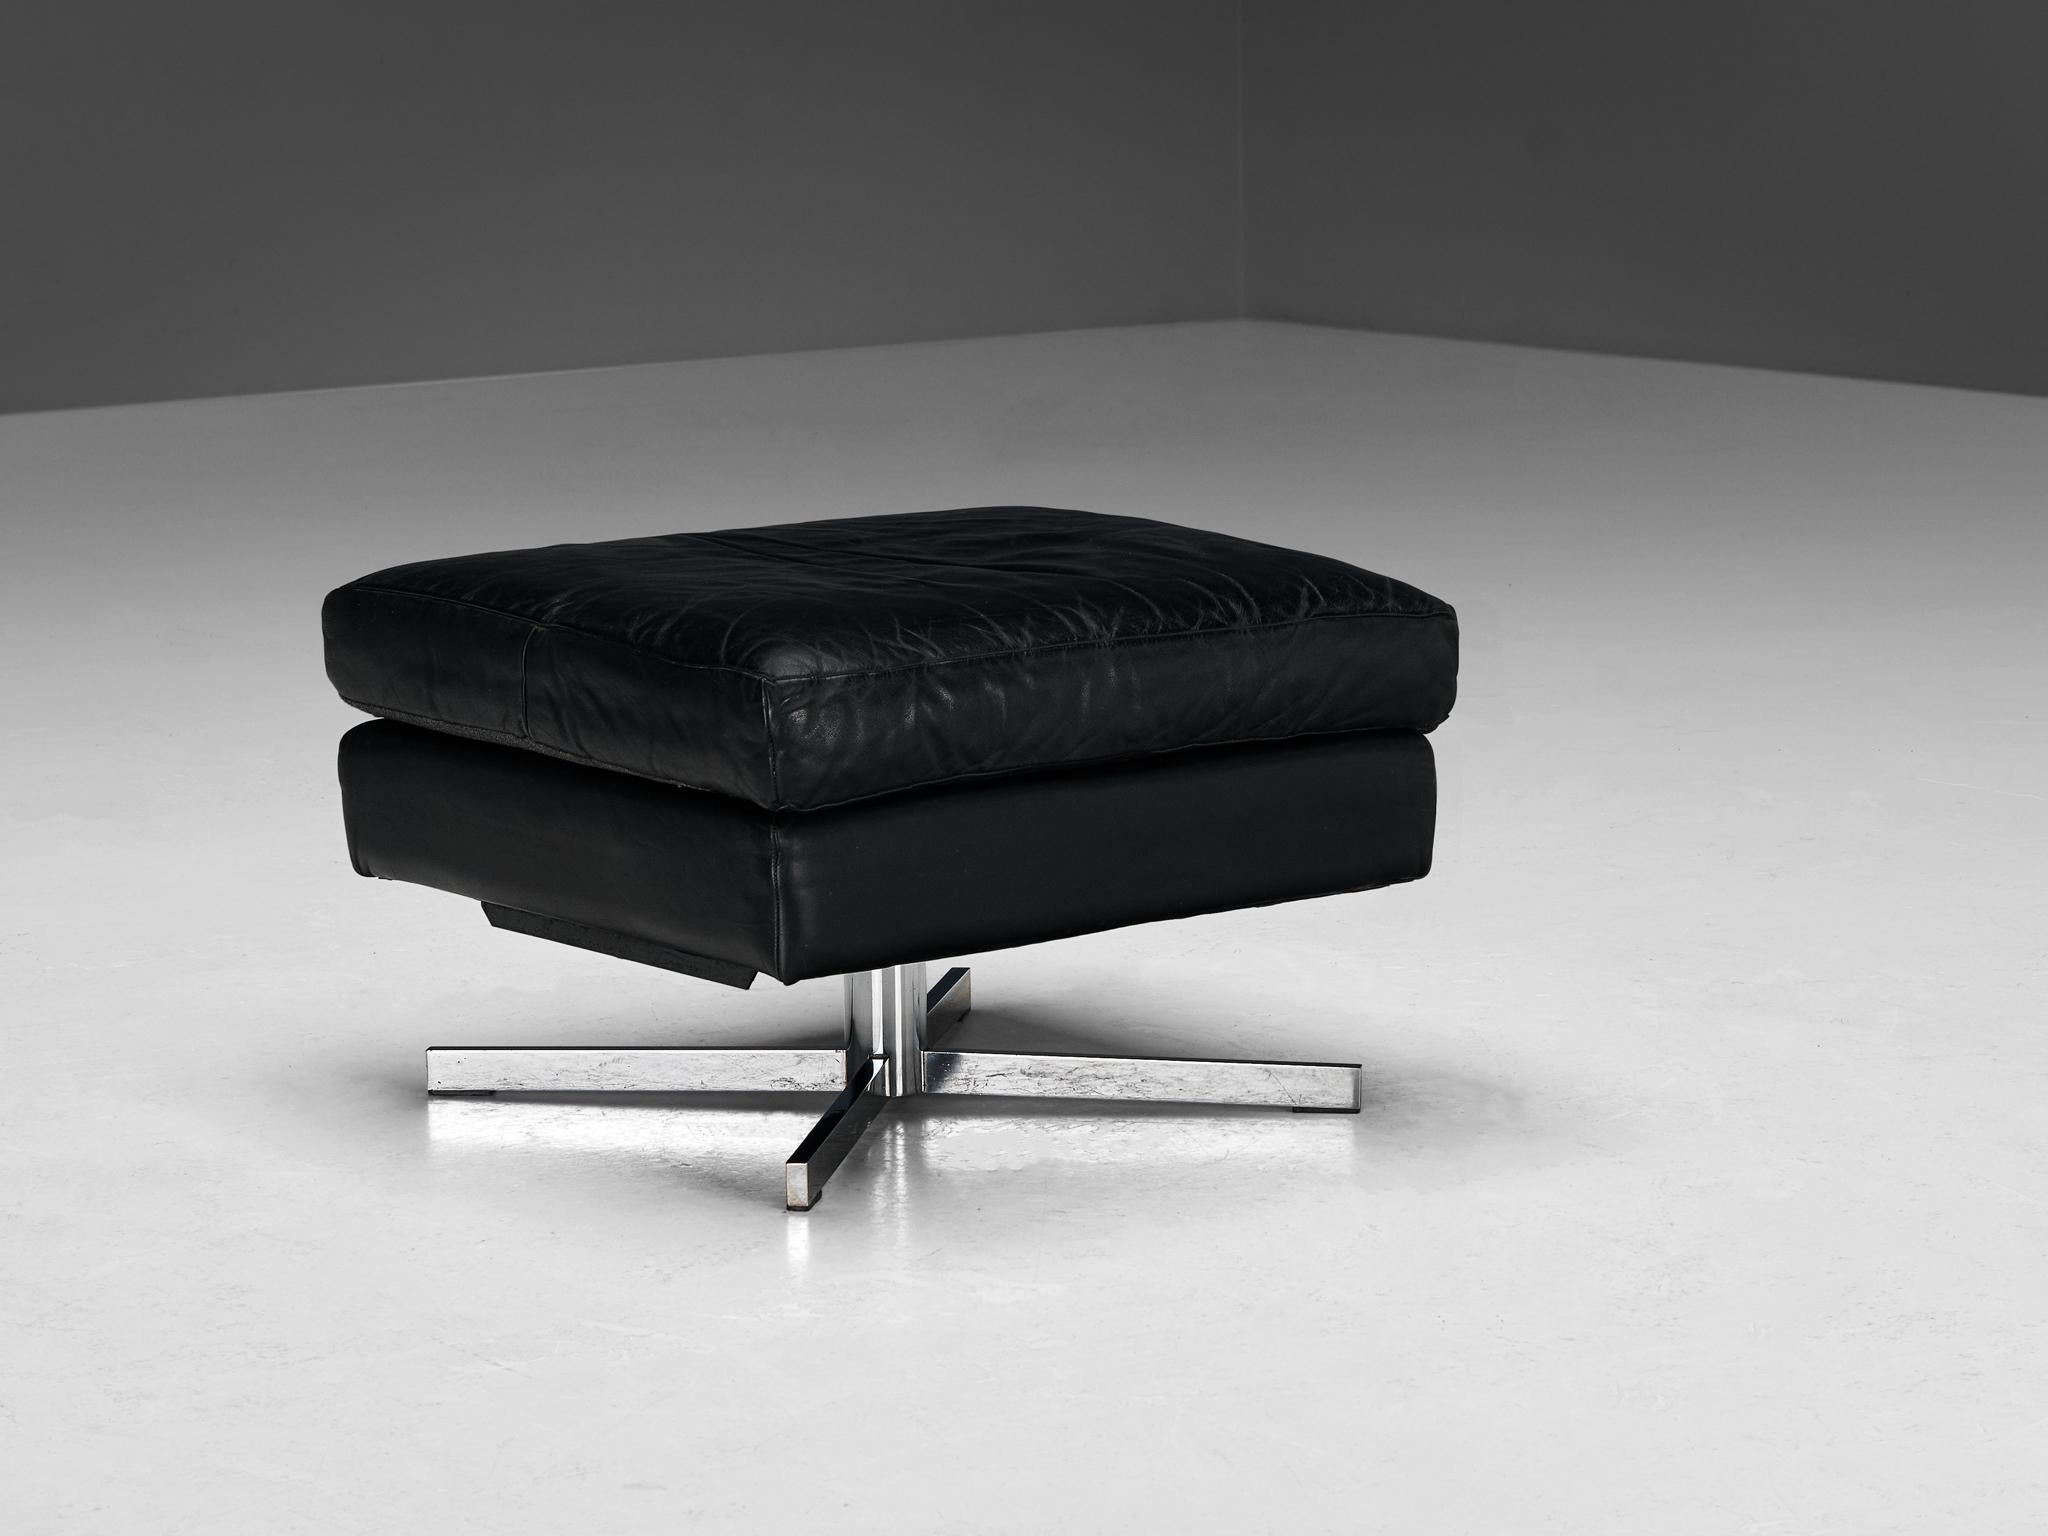 Ottoman, poof or footstool, chrome-plated steel, black leather, Europe, 1980s

A minimalist and durable swivel footstool, featuring a chromed metal base and sleek black leather upholstery, offers both comfort and style. Ideal for resting weary feet